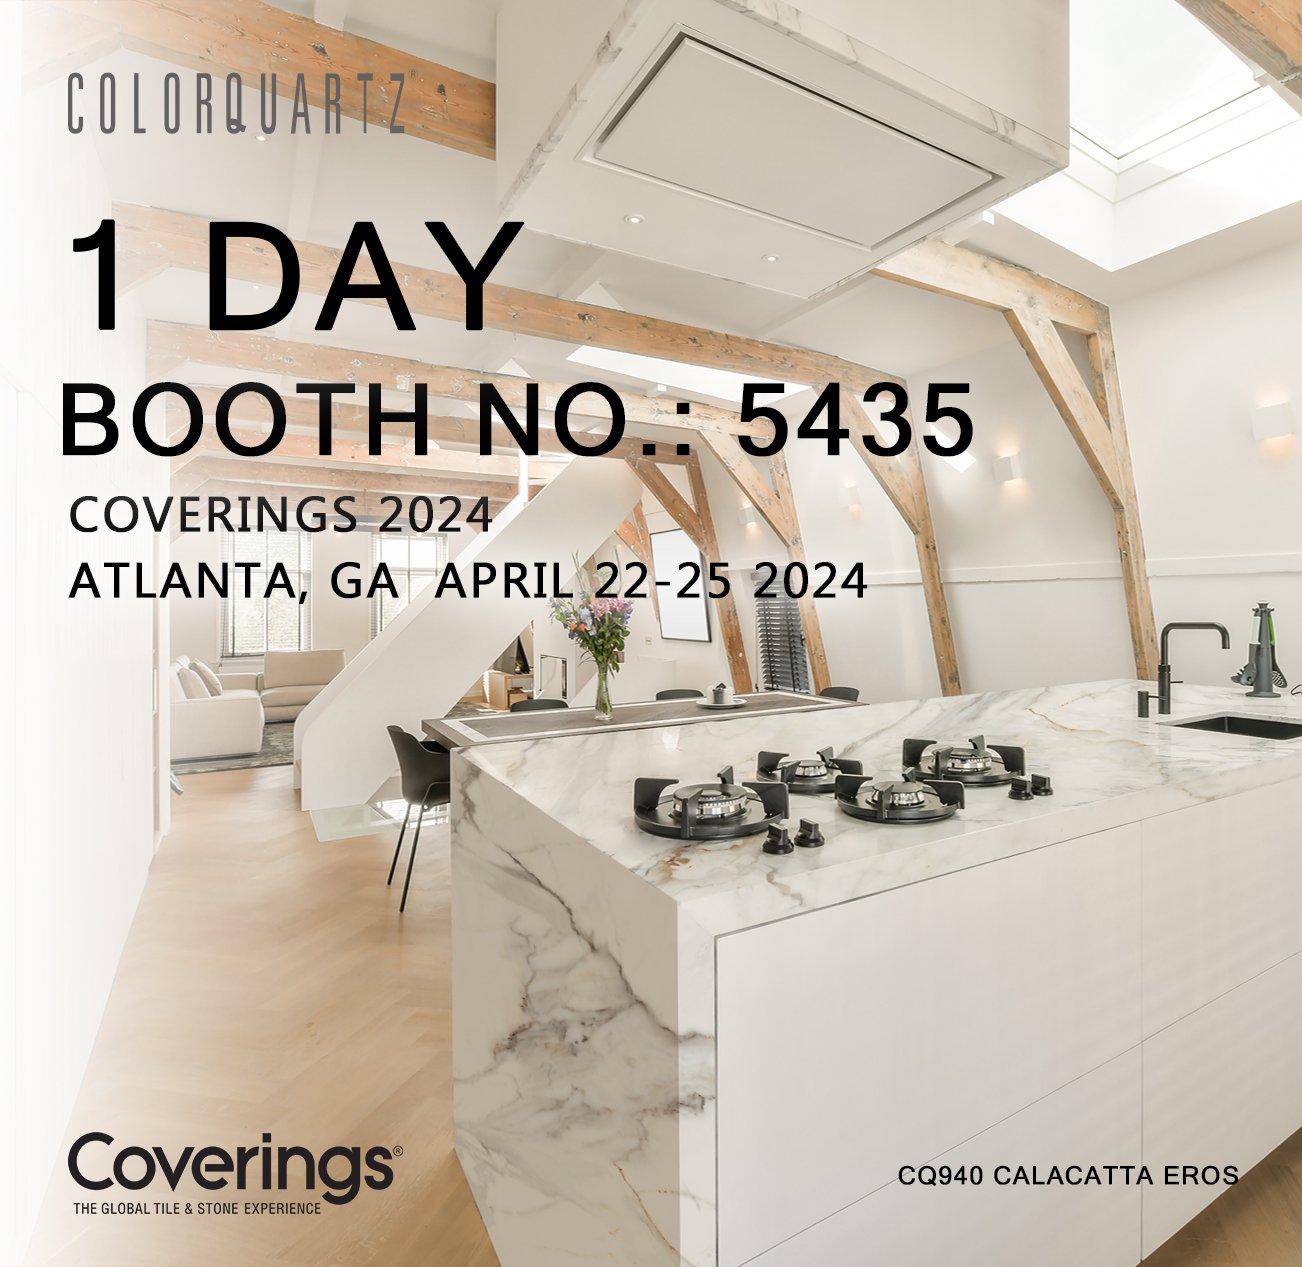 Tomorrow's the big day! Coverings 2024 is almost here. Join us at Booth 5435 to witness the unveiling of Colorquartz's 2024 Latest Collection. Let's create something extraordinary together! #Colorquartz #Coverings2024